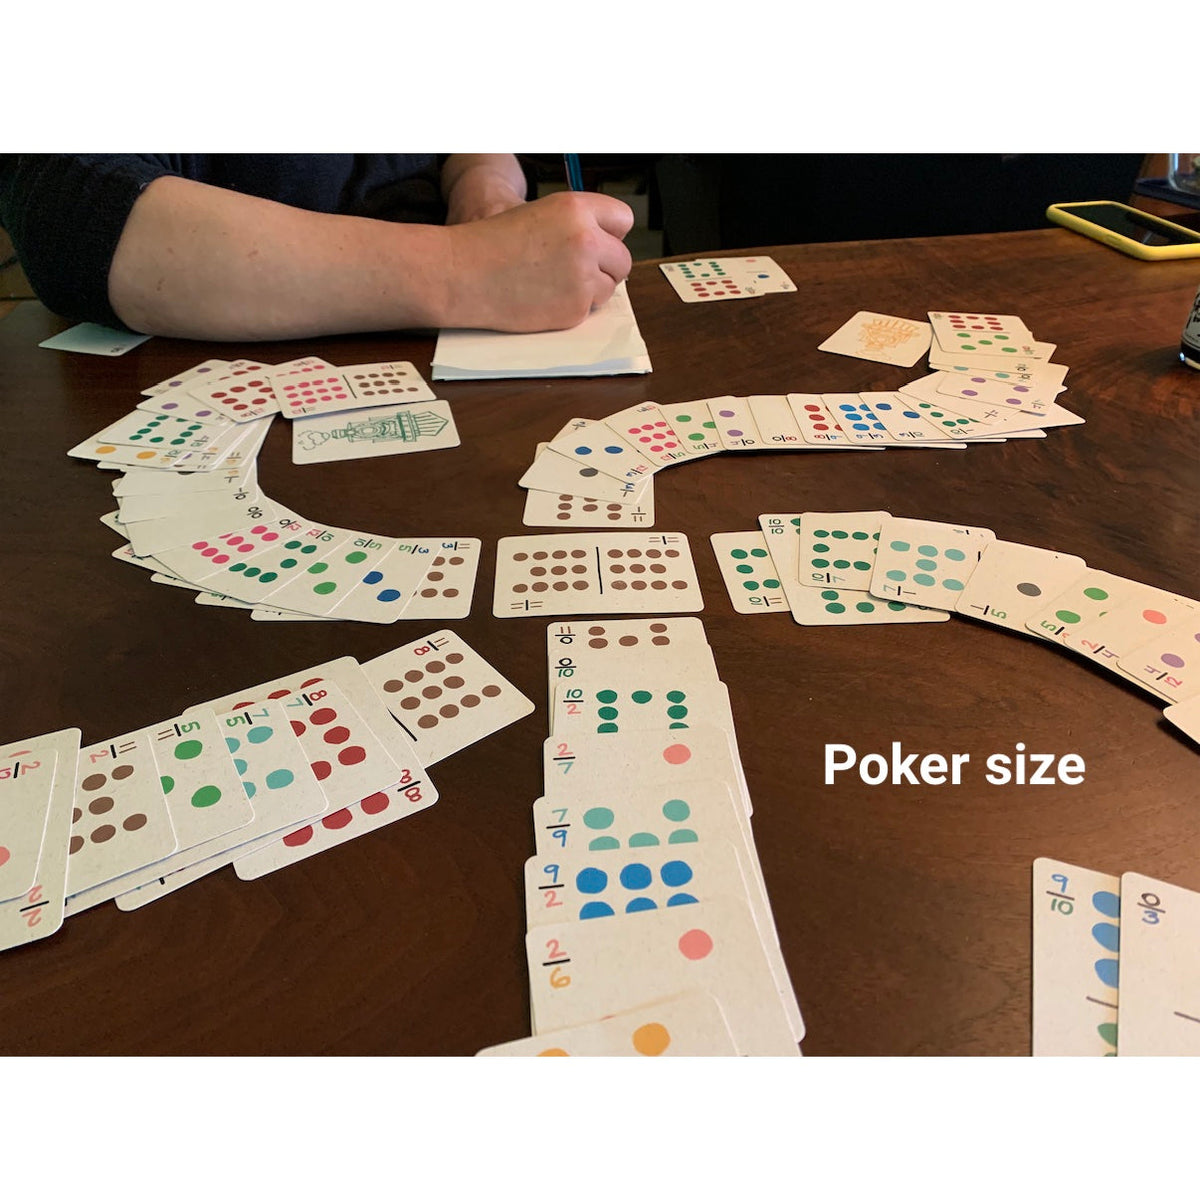 Travel dominoes in the larger poker size on a table with two people playing